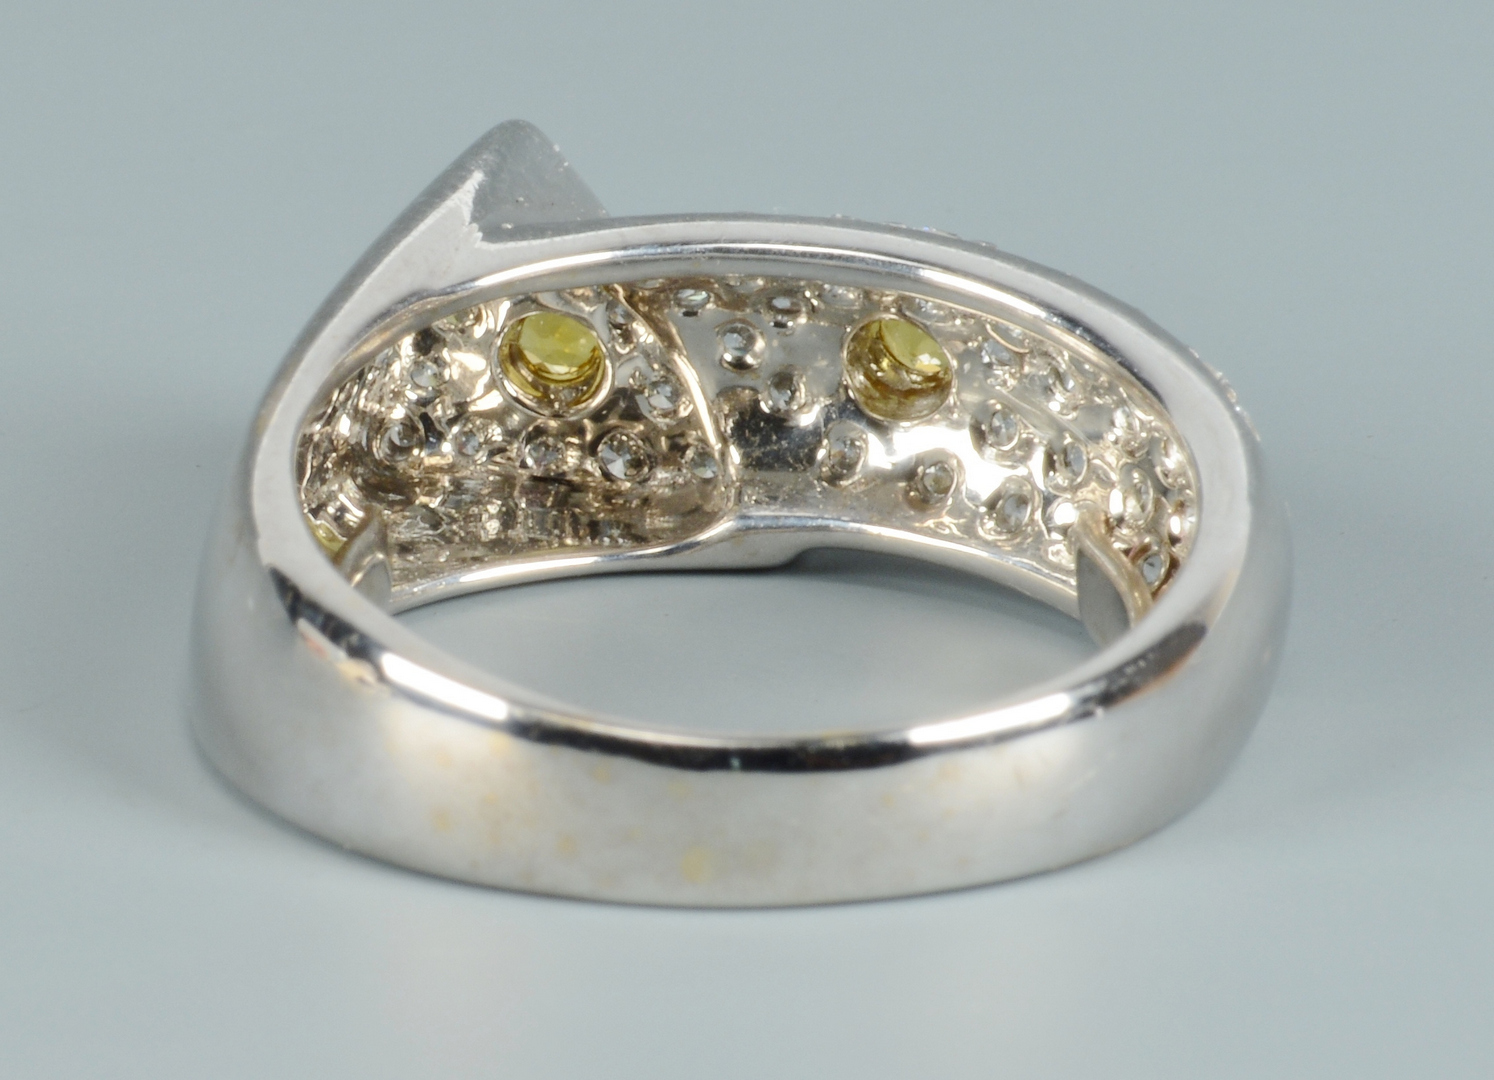 Lot 3088052: Contemporary Plat Dia Yellow Sapphire Ring